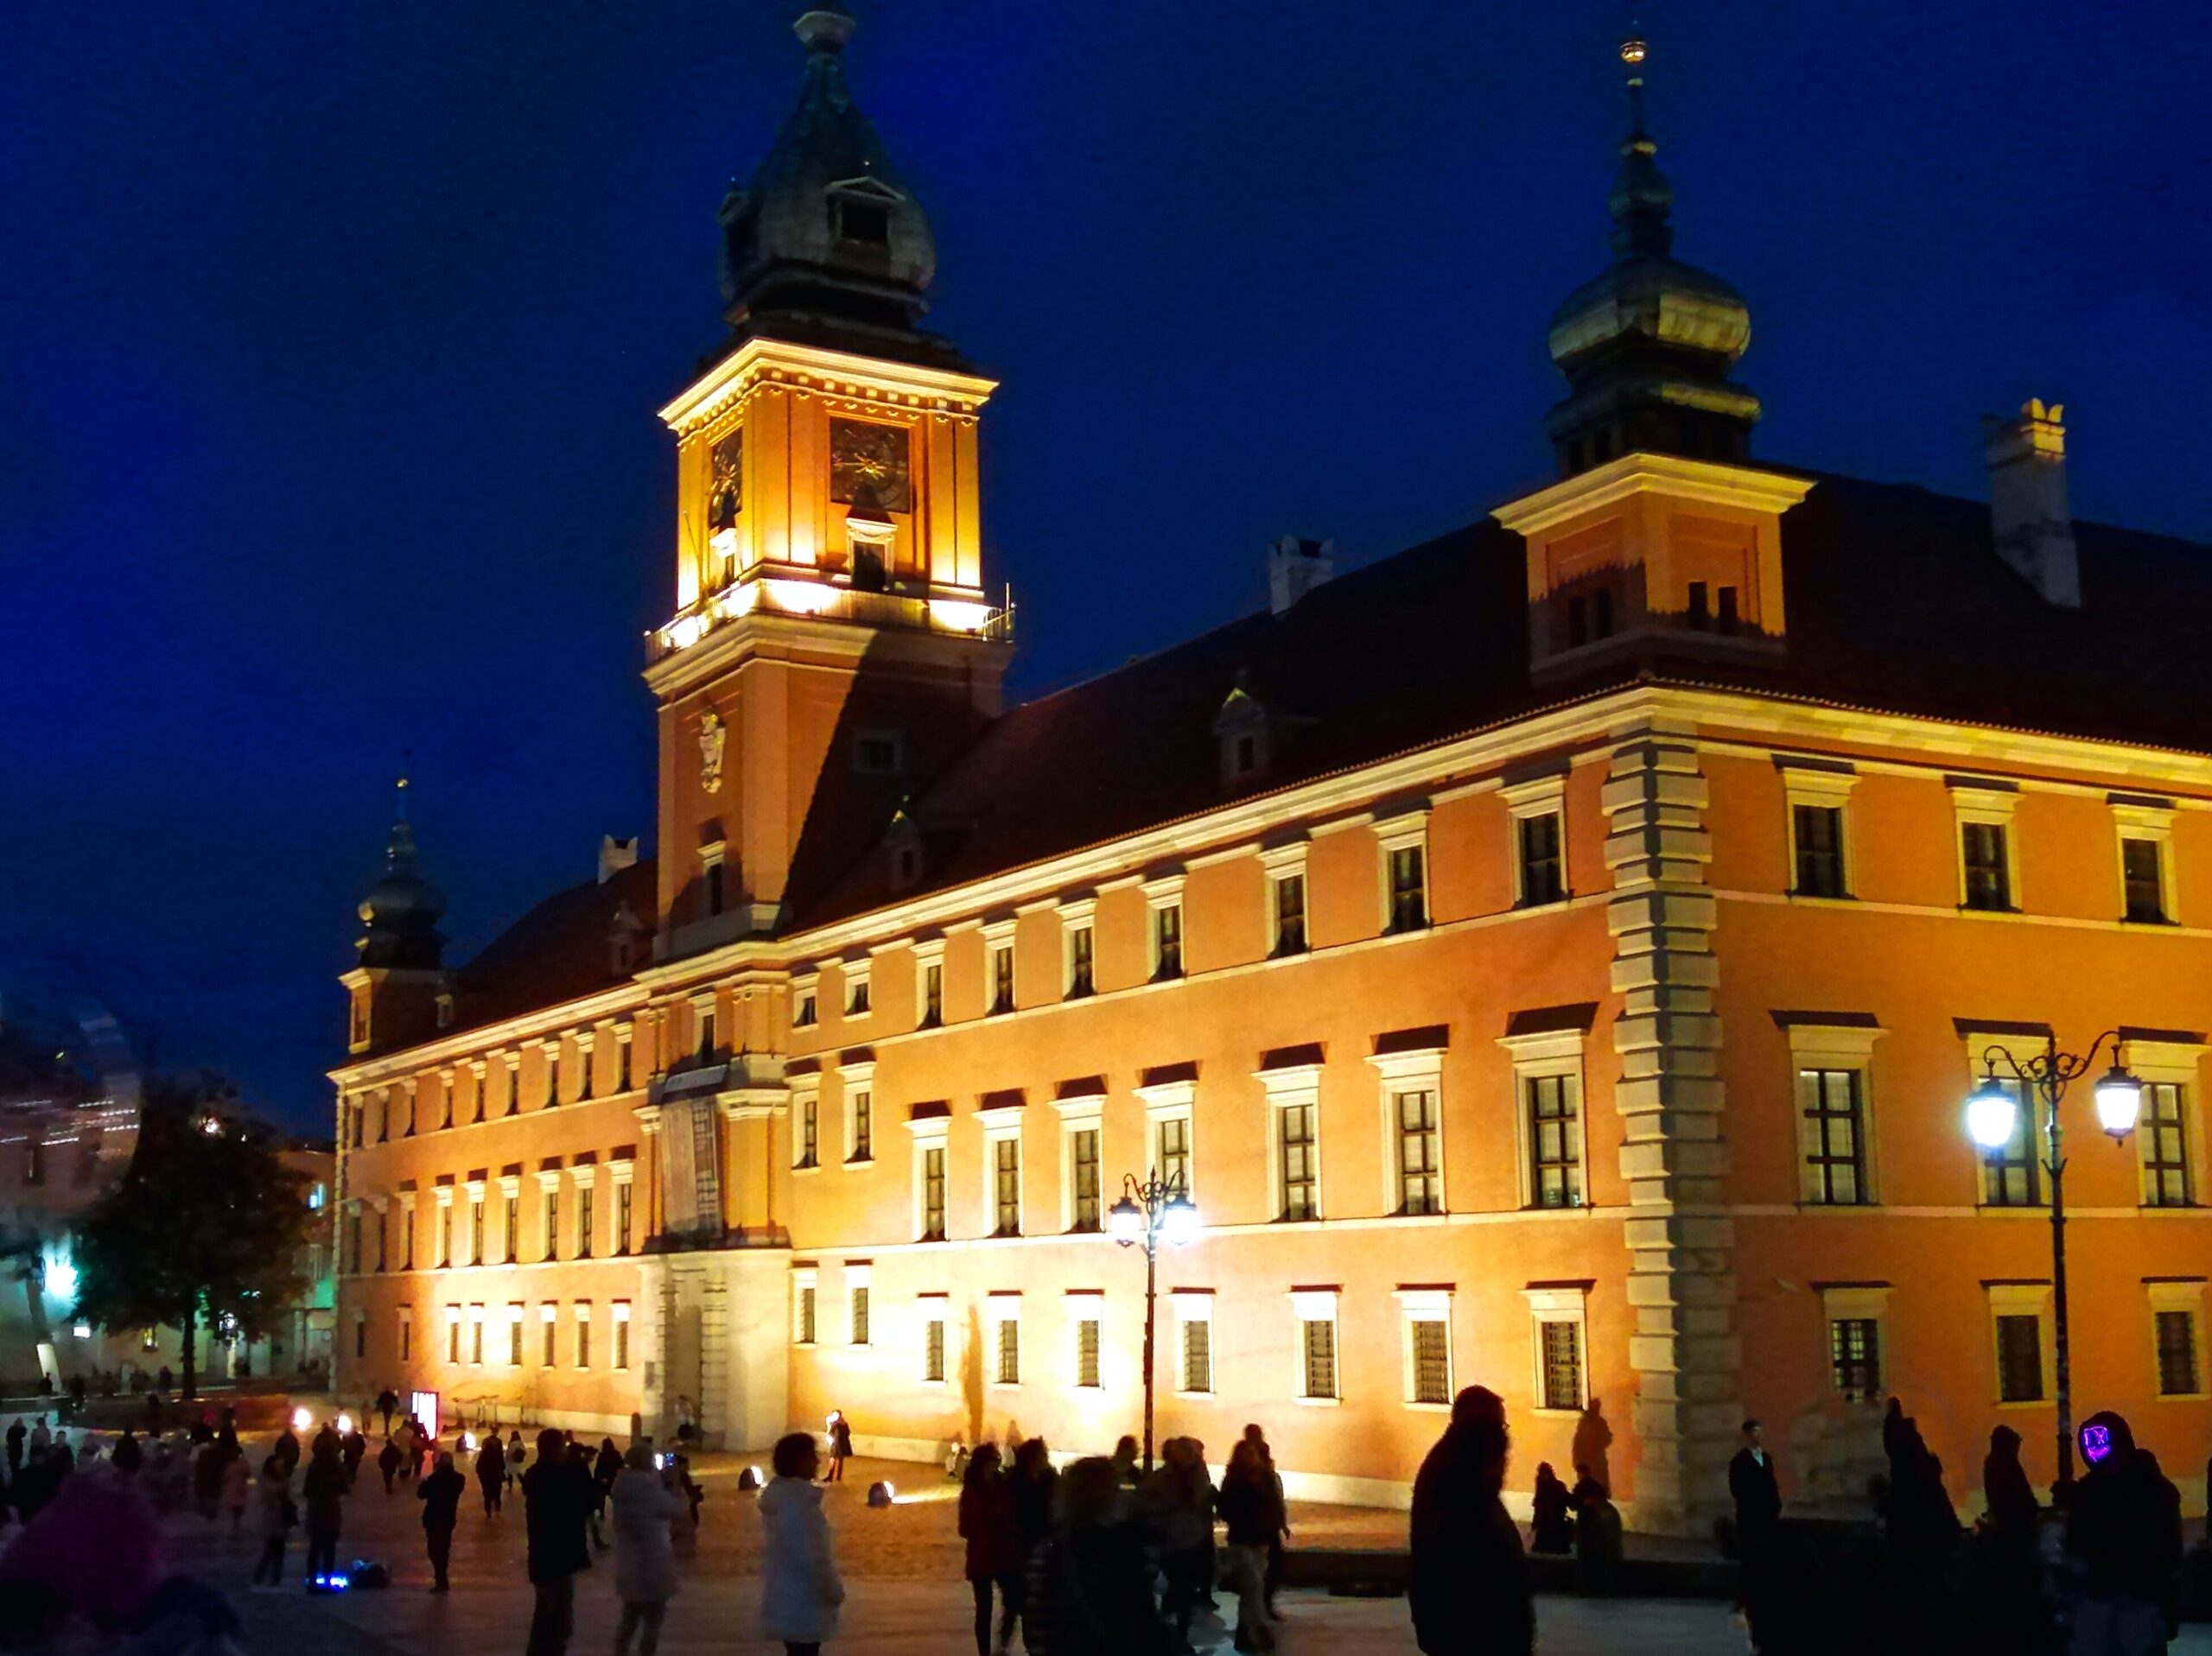 the Royal Castle at night during the weekend trip to the capital city of Poland